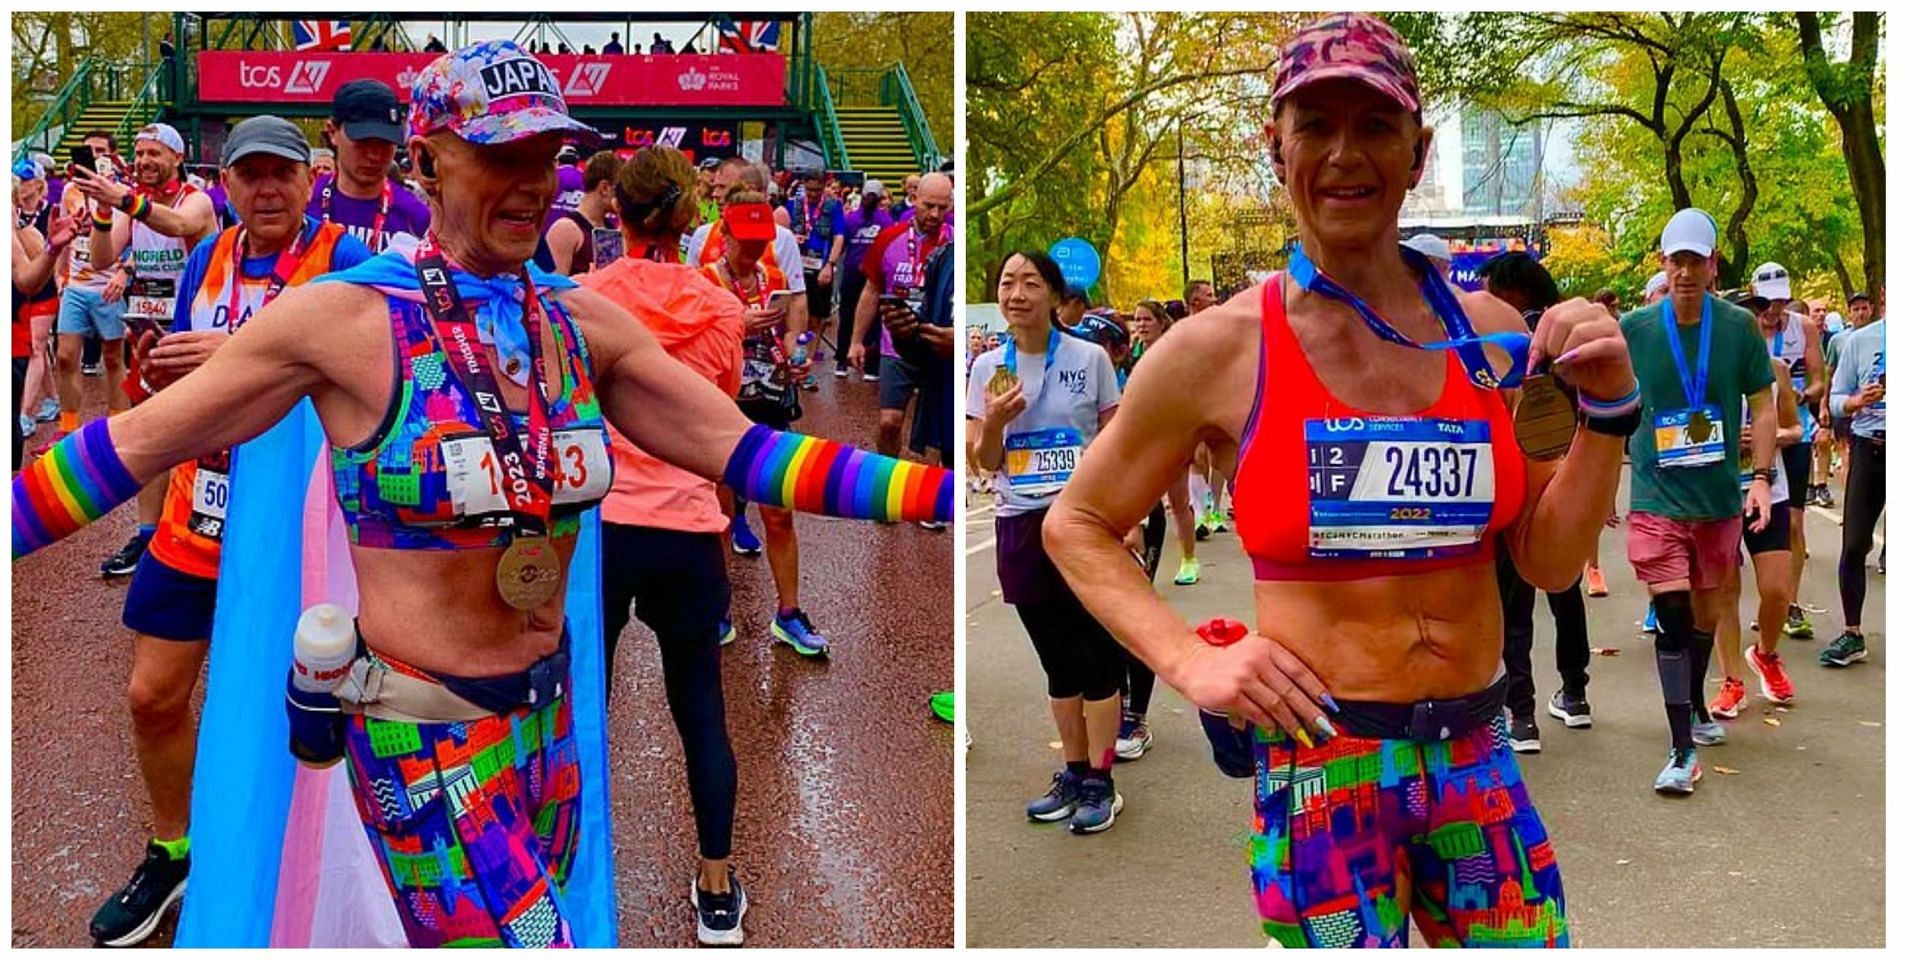 Social media users divided after a trans runner defeated 14,000 women during the London marathon in the female category. (Image via Glenique Frank/ Facebook)